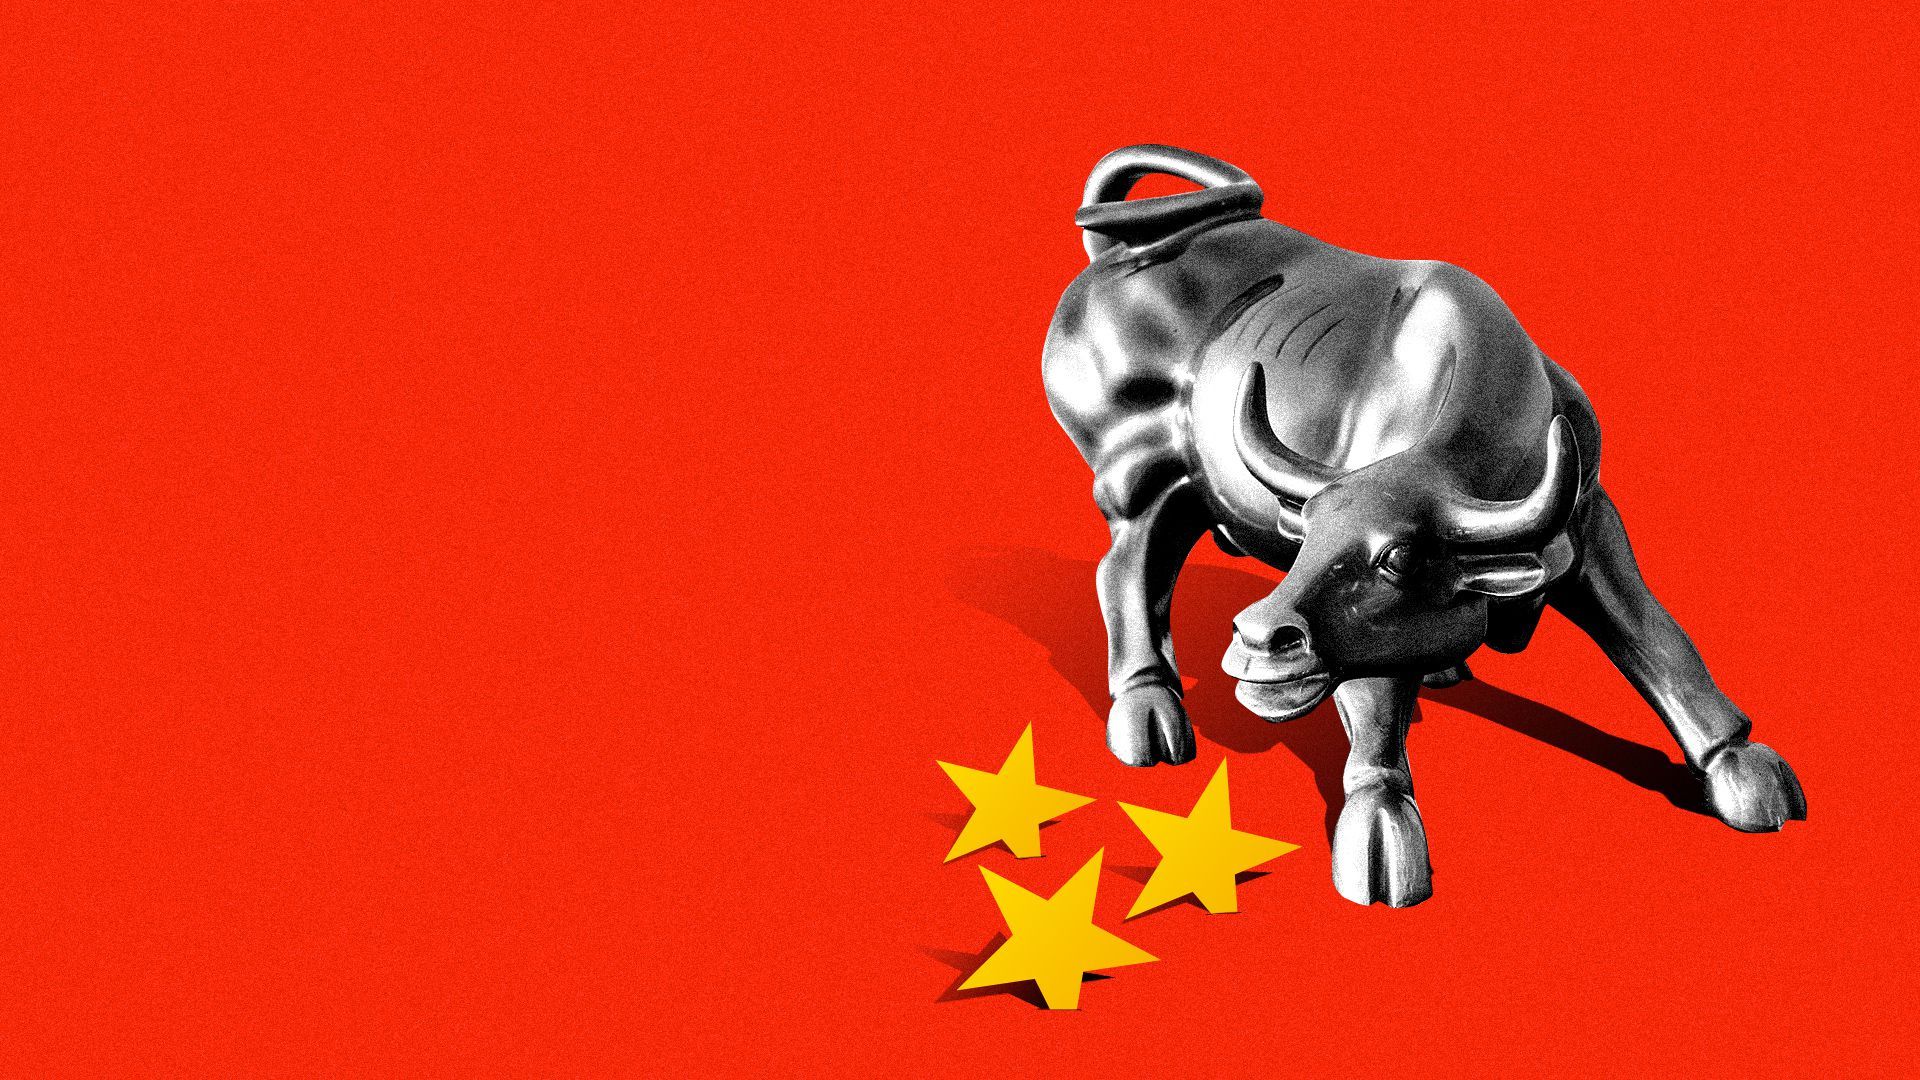 Illustration of the Wall Street bull with Chinese stars lodged into the ground near its hooves. 